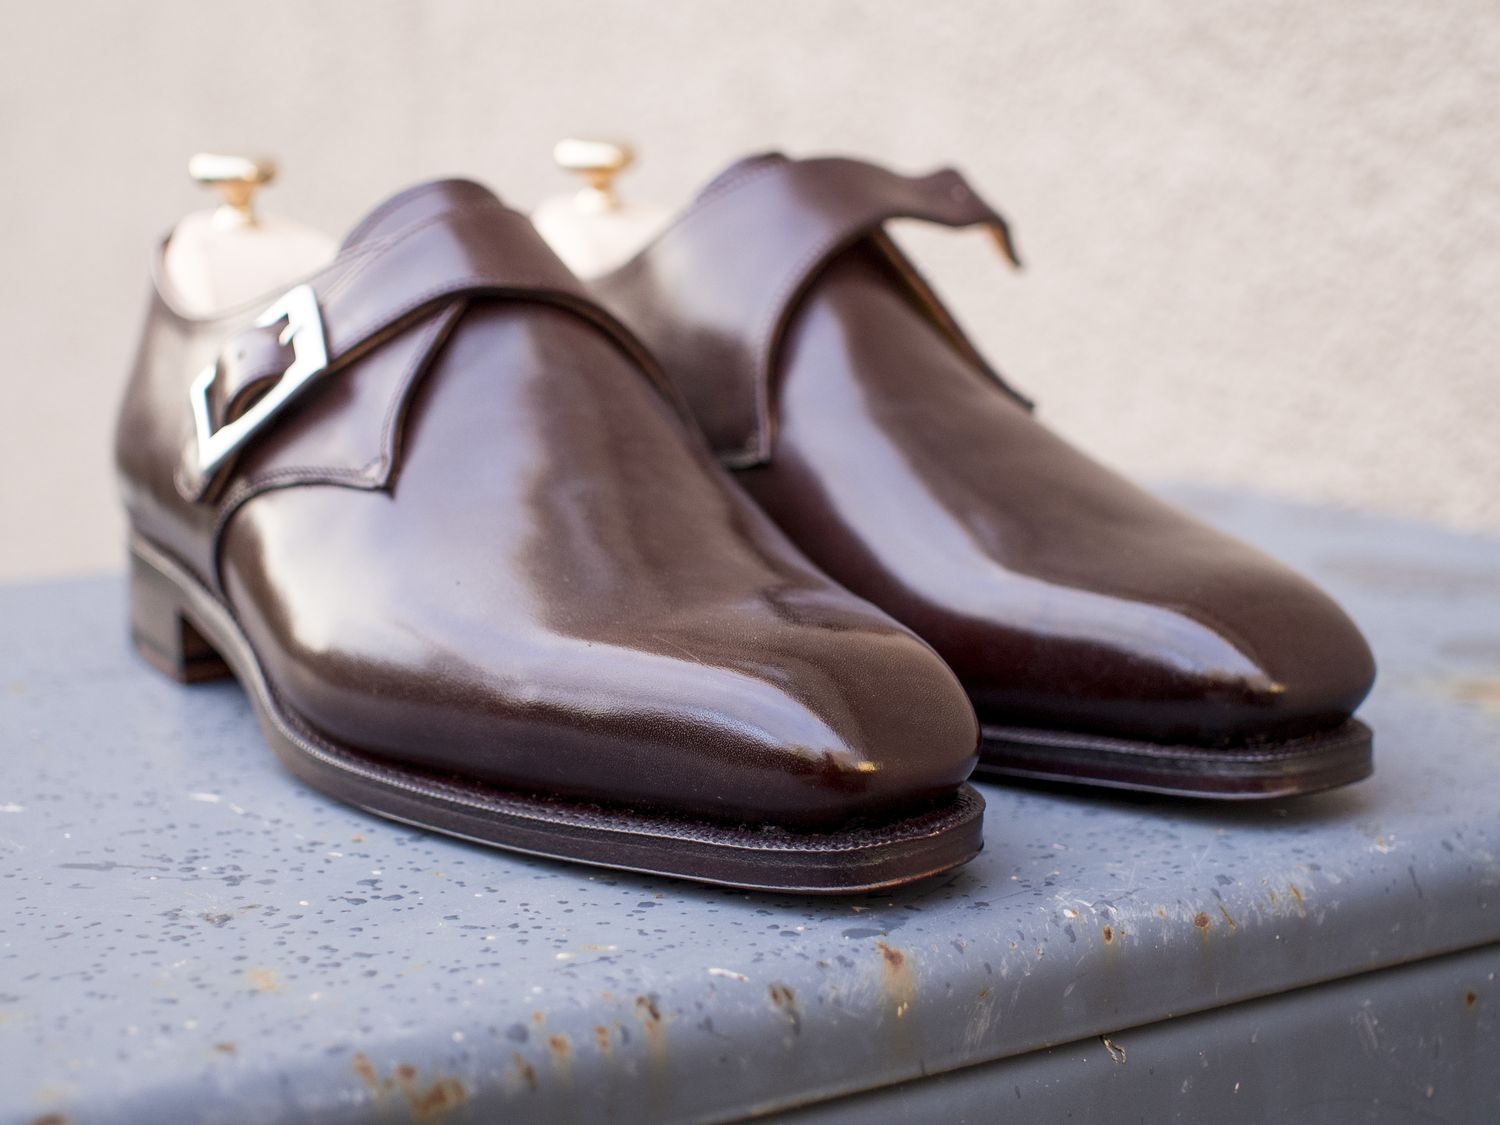 Meermin Park Last MTO - Shape, Fit and Quality